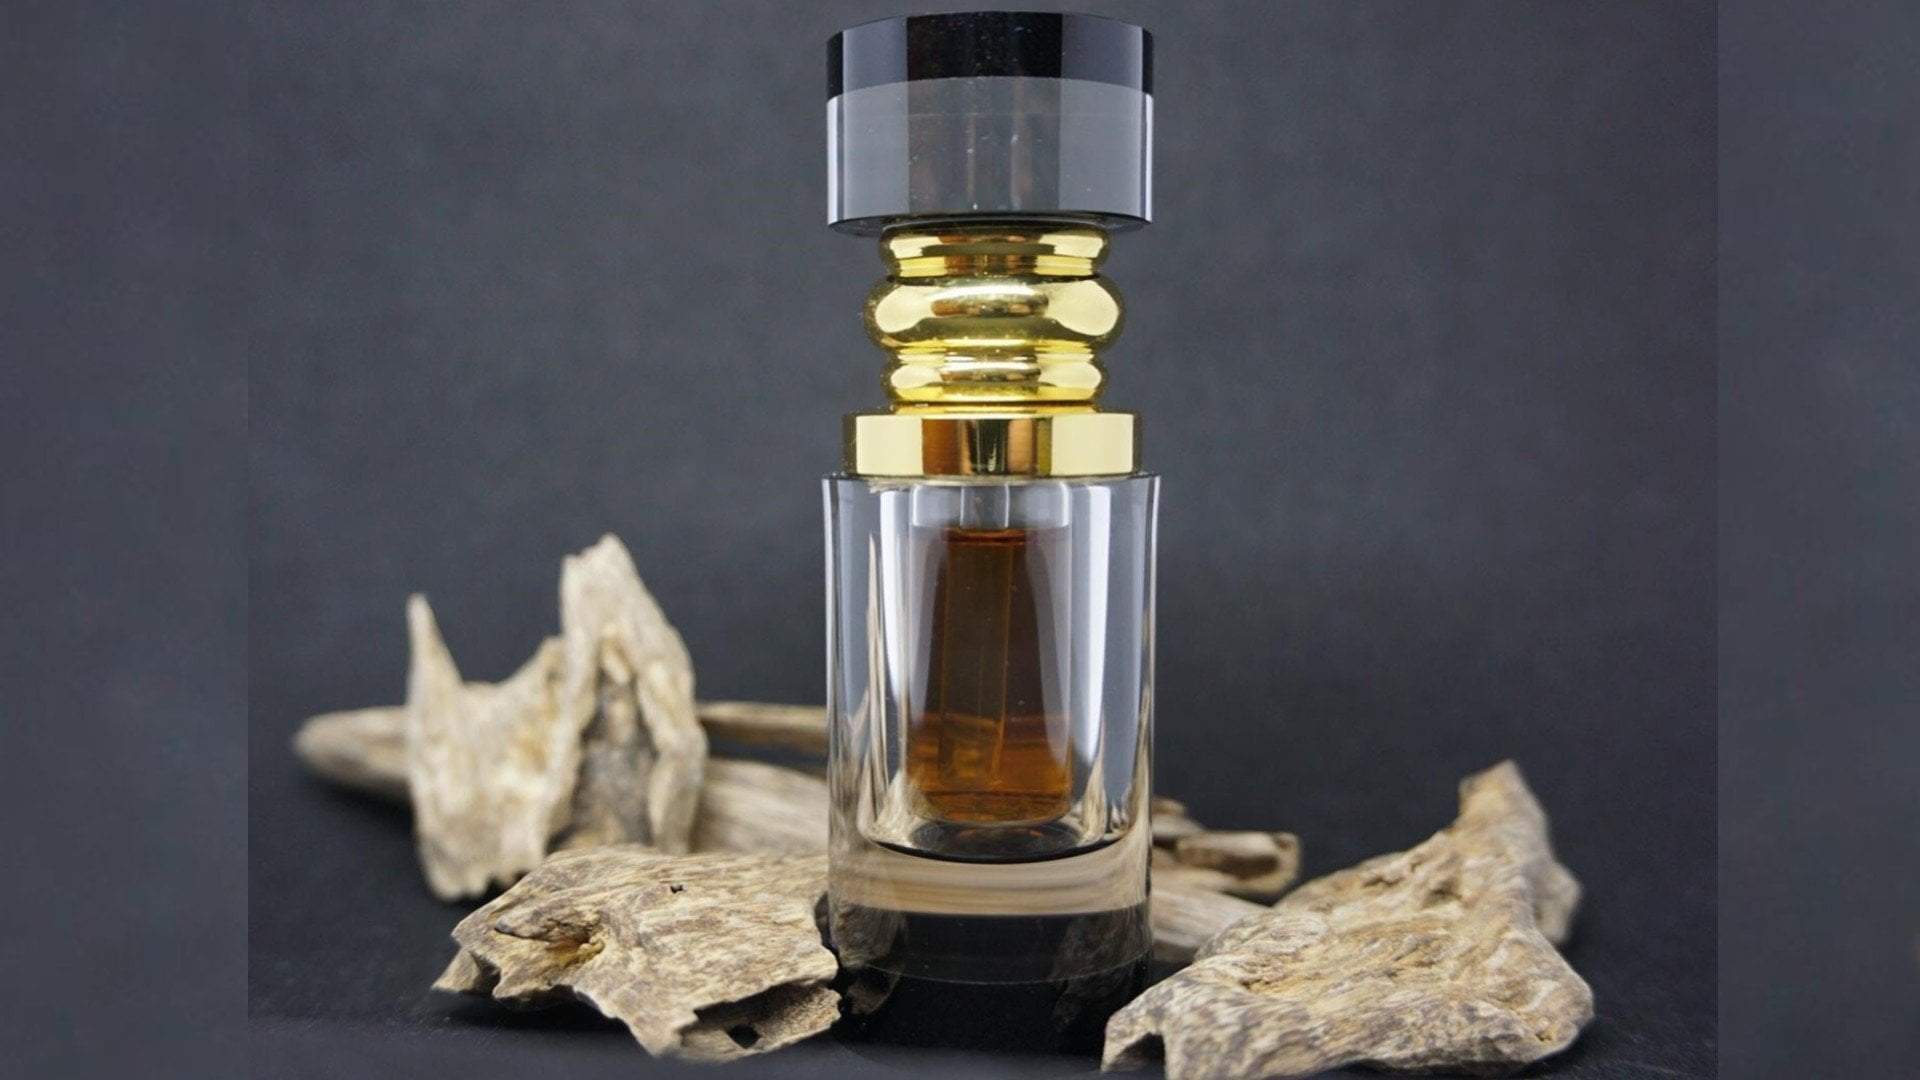 100% Pure Cultivated Agarwood Oil (Oud) Specialty- Super Smooth Floral Oud - 3ml Crystal Cylinder